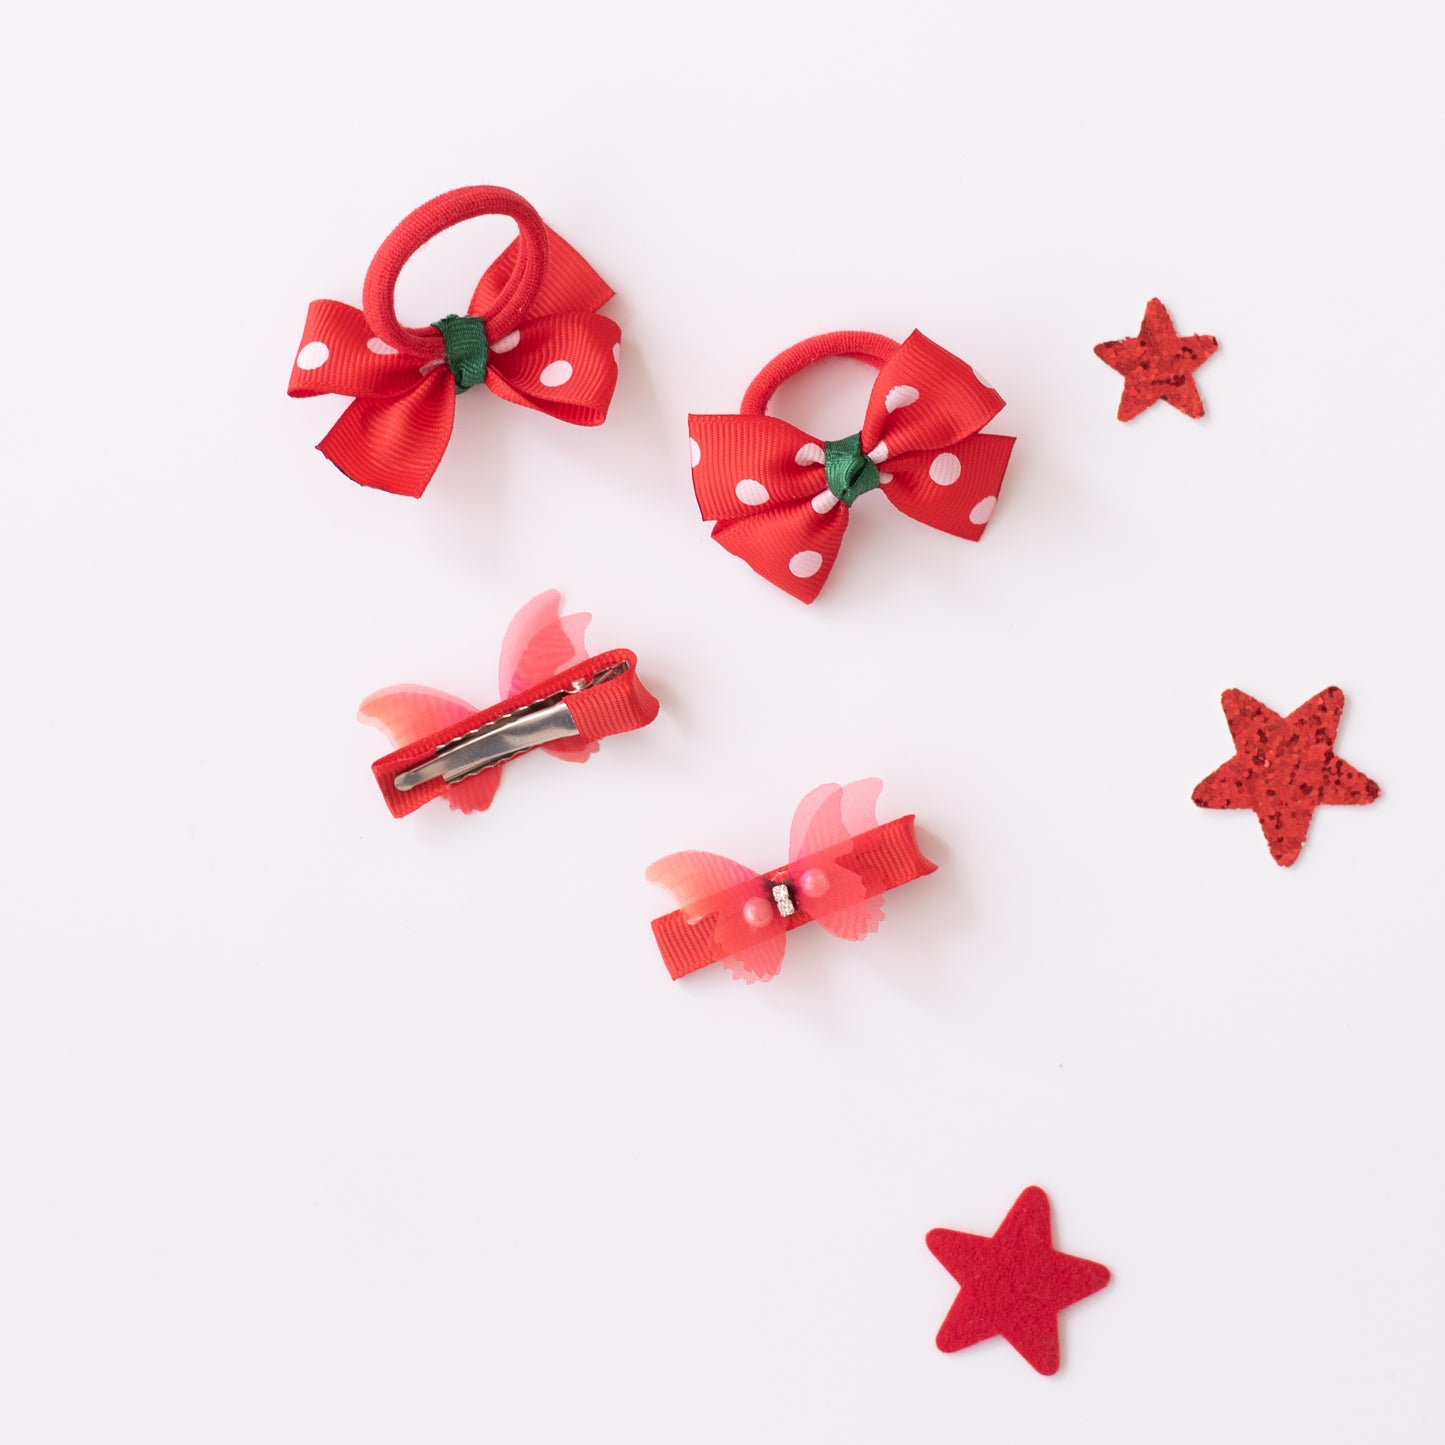 Combo : Set of 1 pair red polka dotted rubberbands and 1 pair unique butterfly pins. - Red